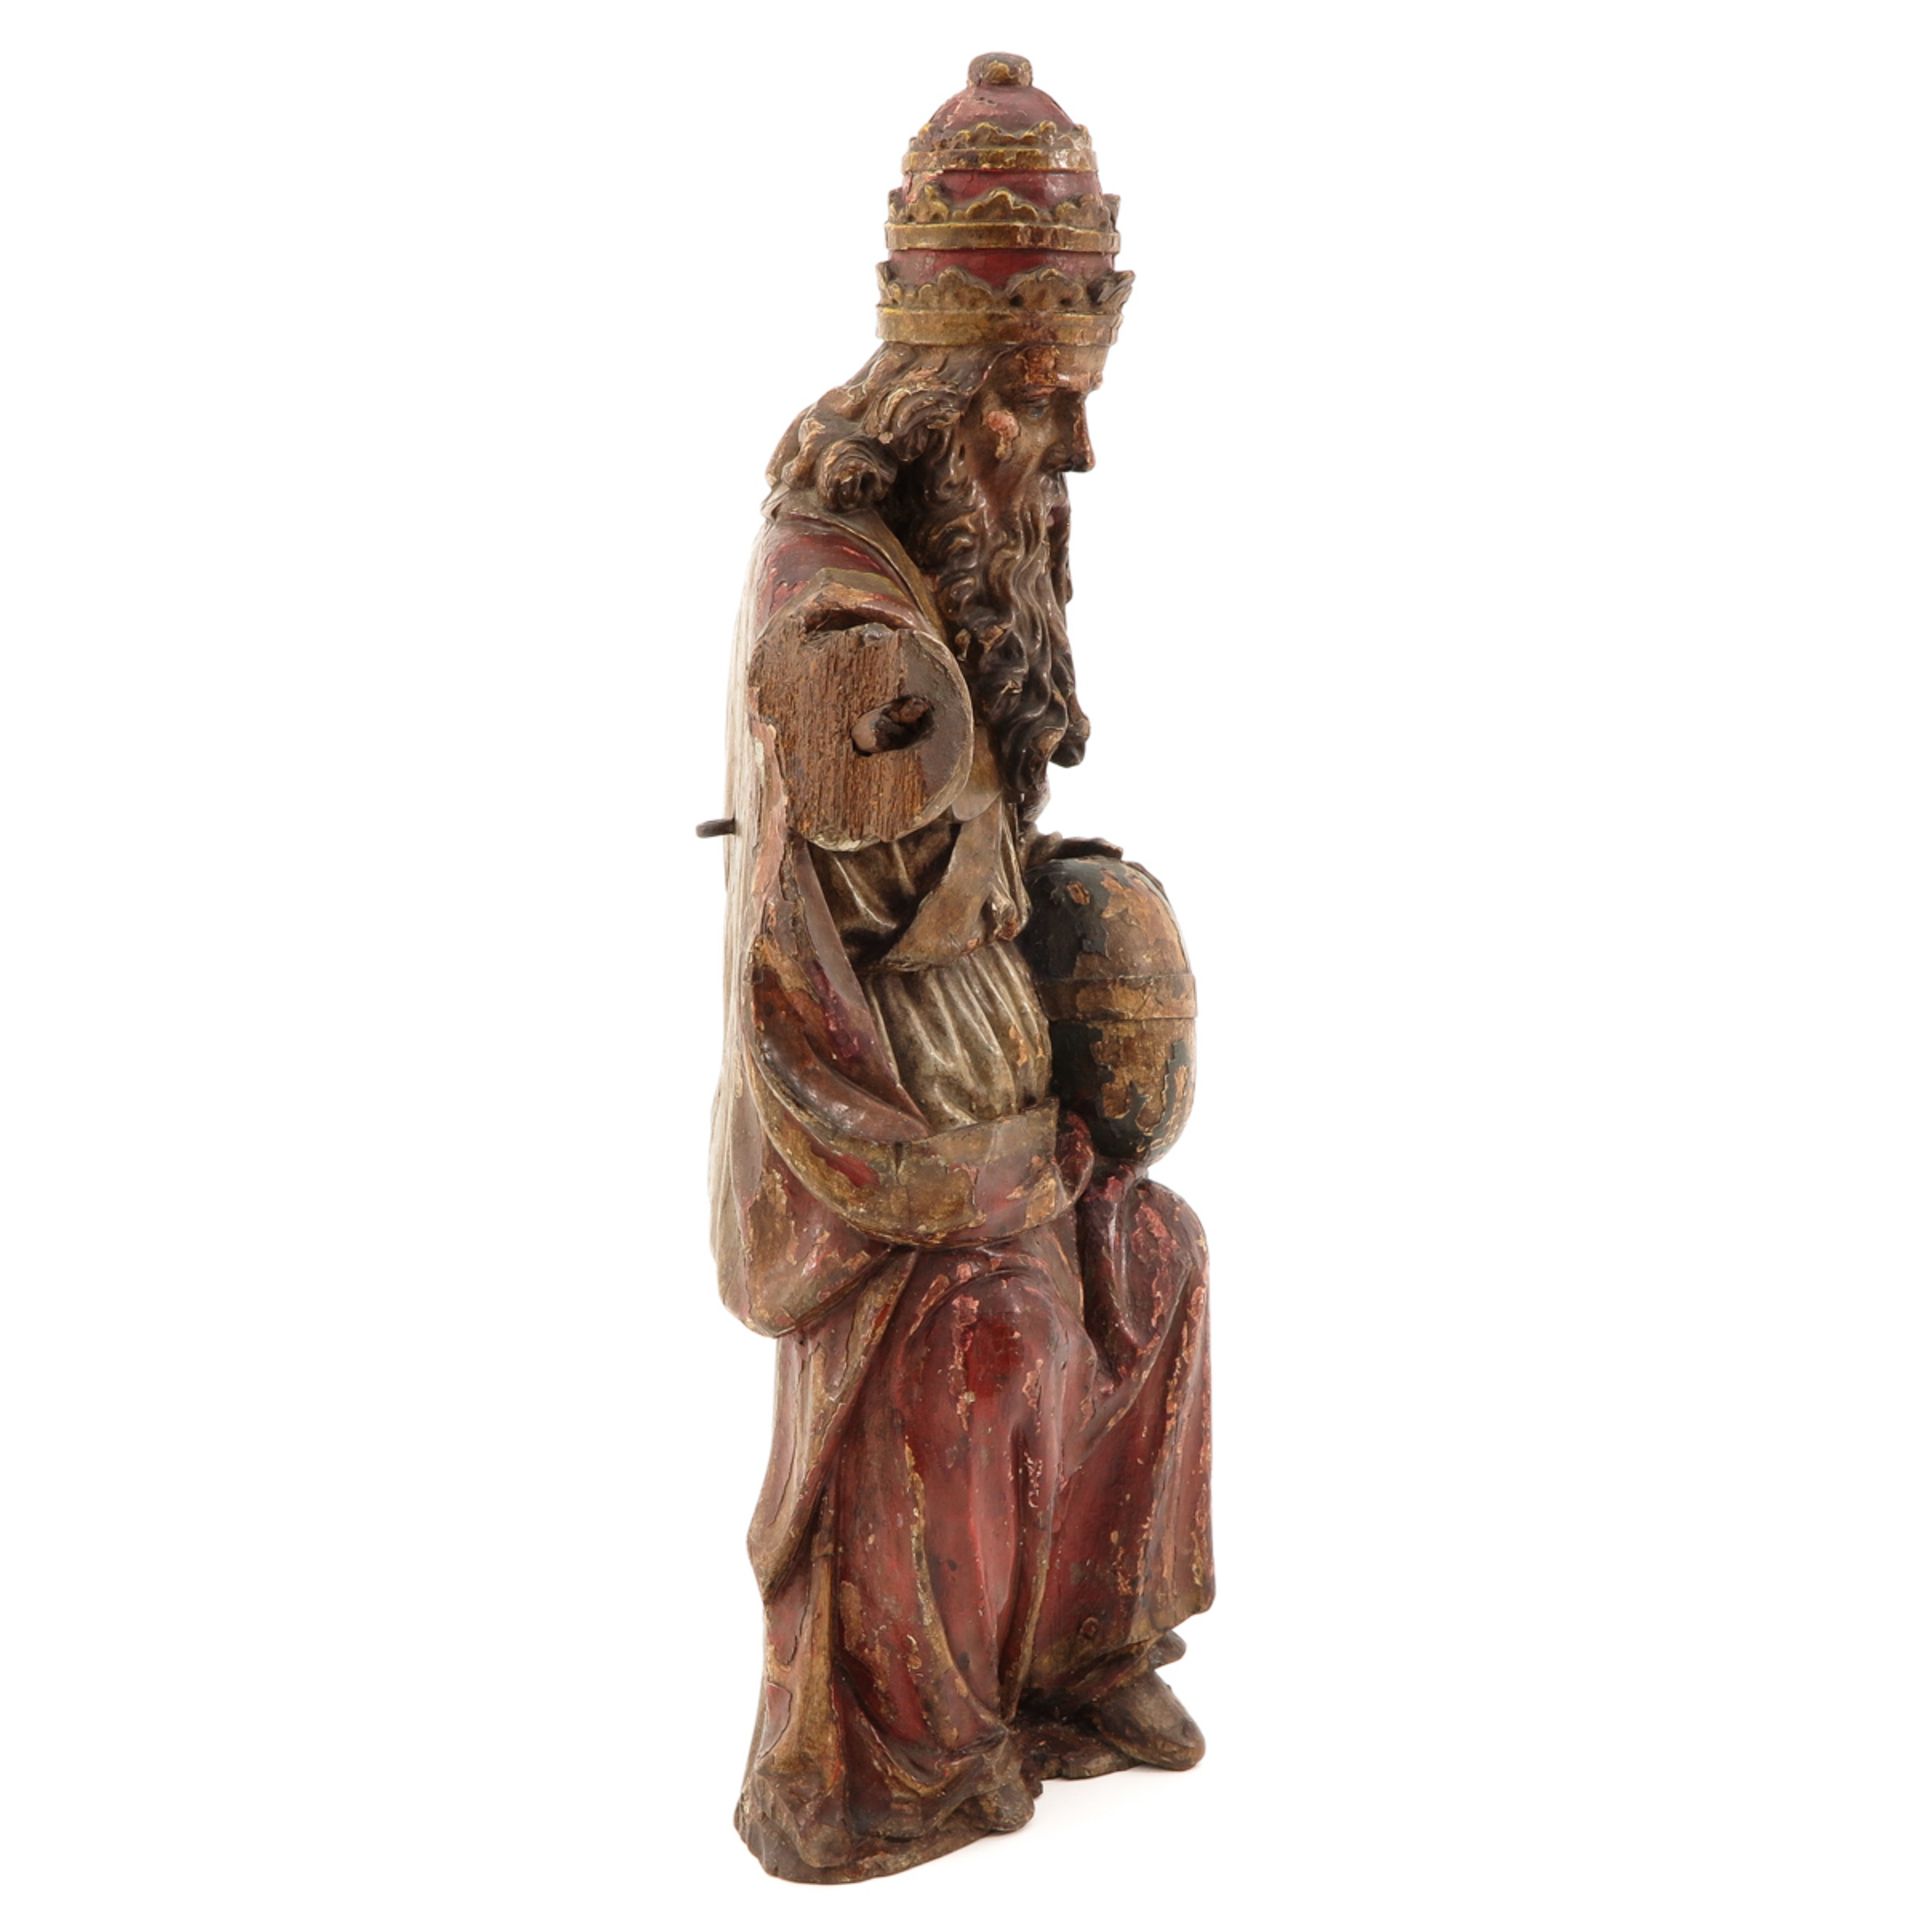 An 18th Century Sculpture Depicting God the Father - Image 4 of 9